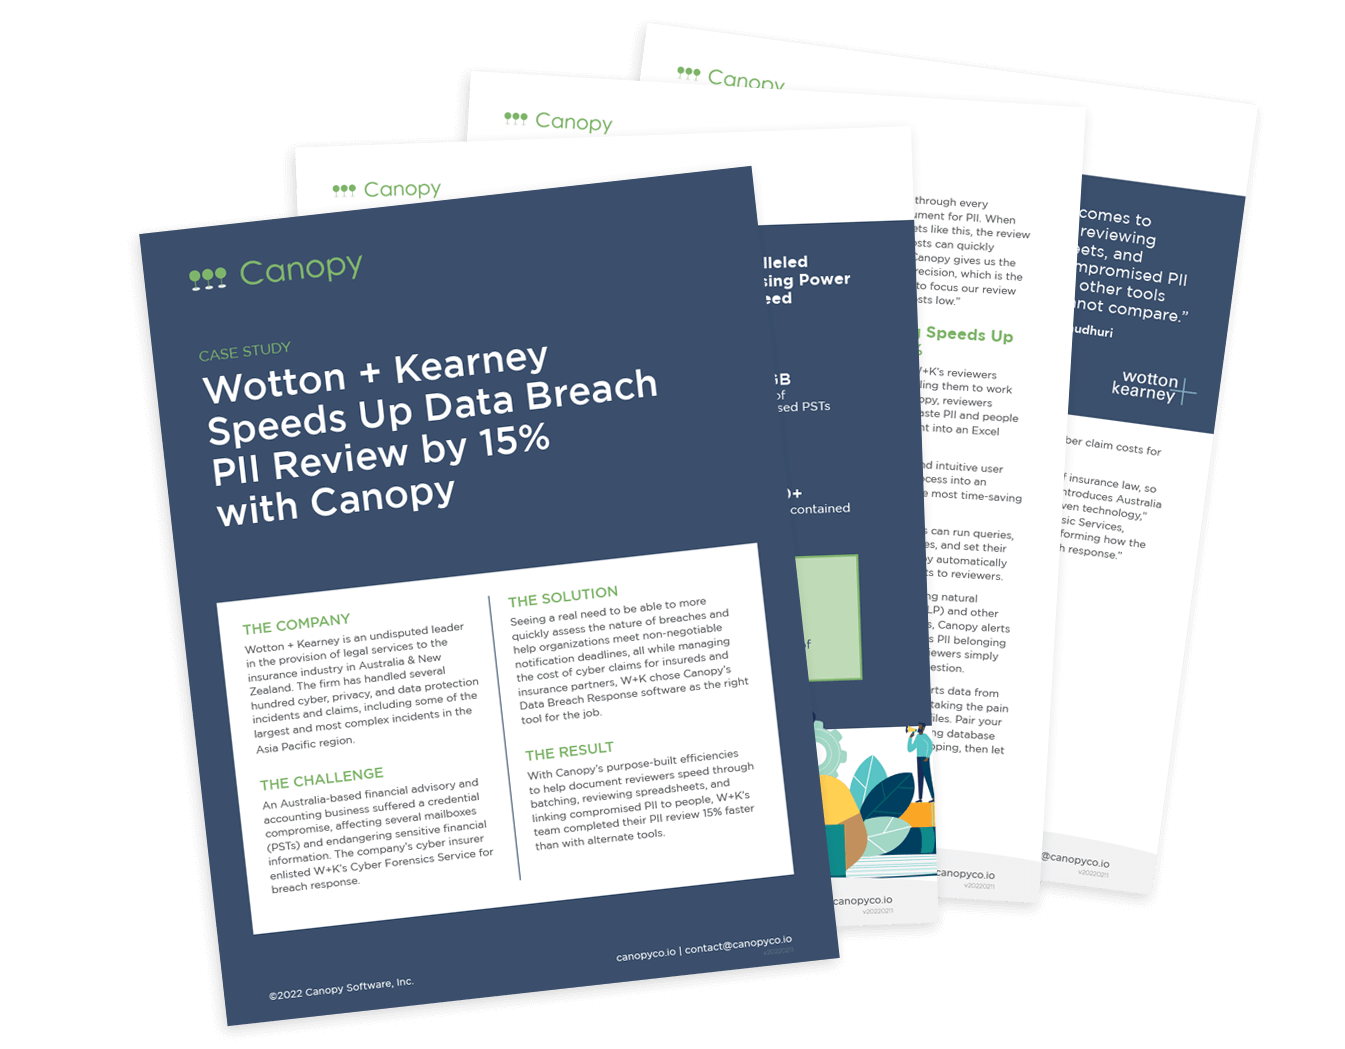 case study document thumbnail - wotton + kearney speeds up data breach PII review by 15% with Canopy